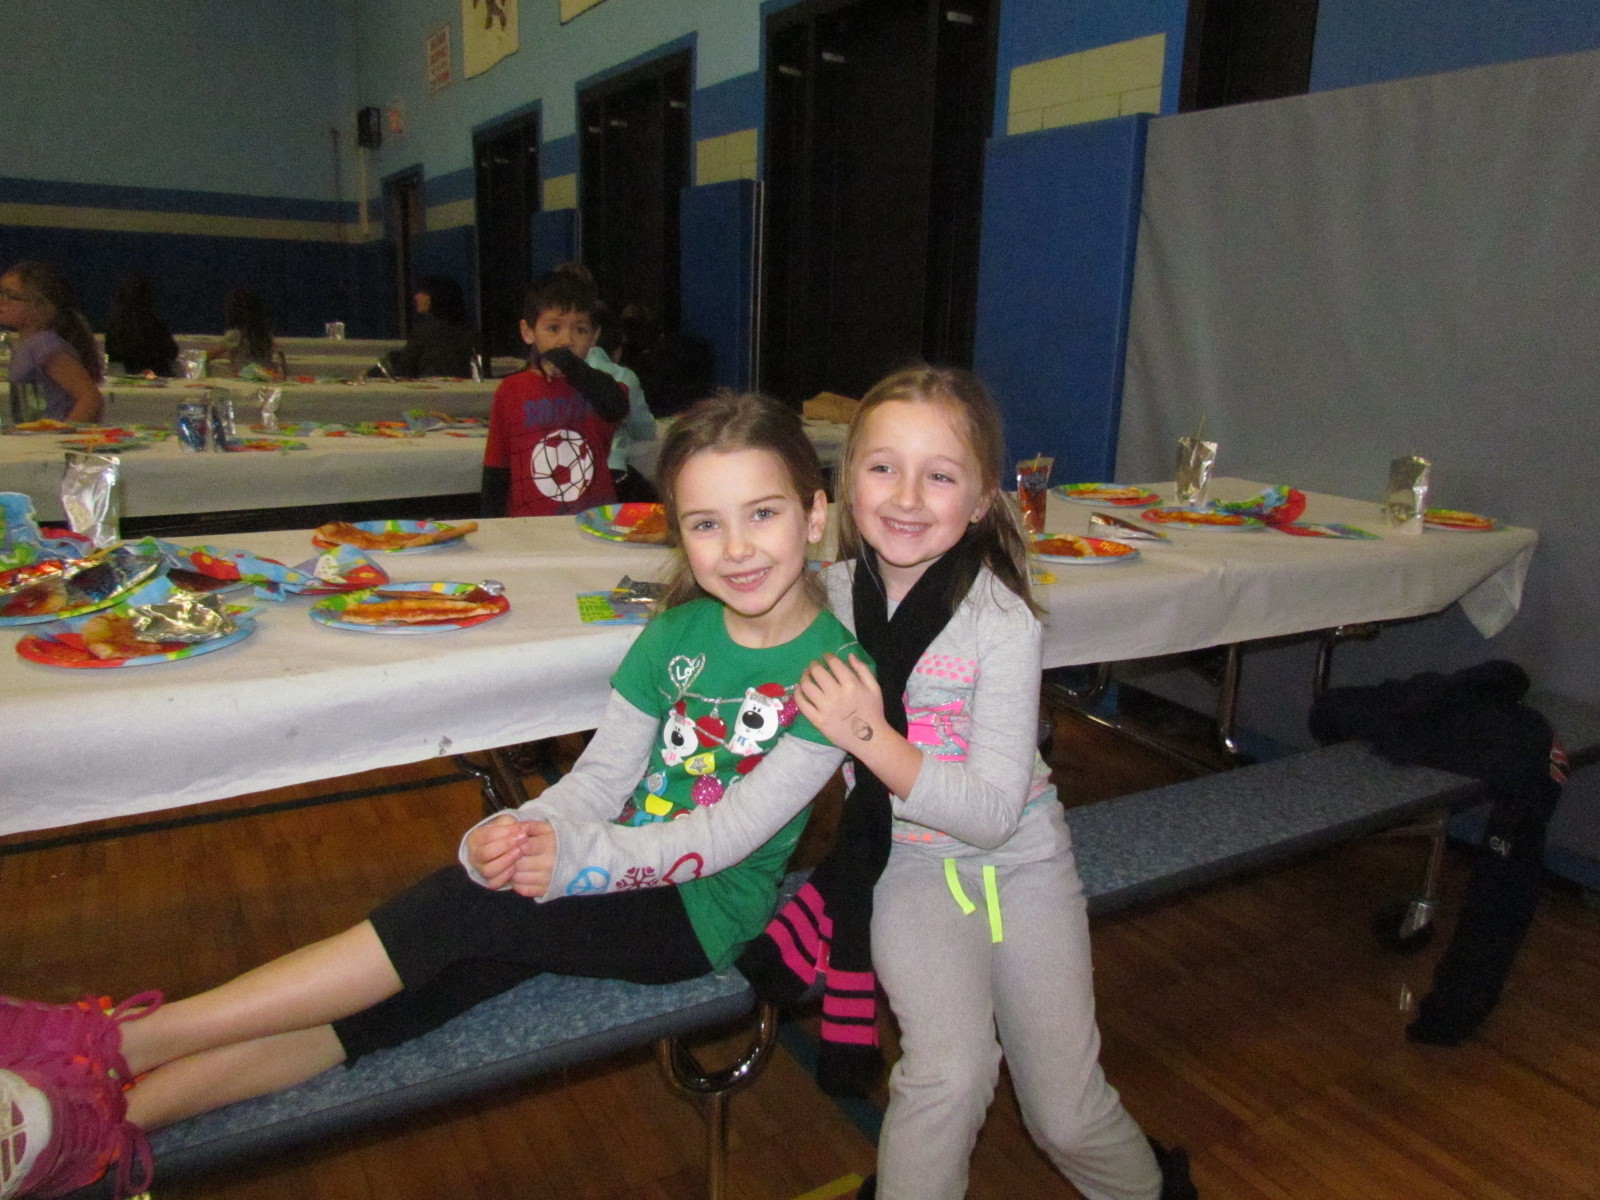 First graders Grace Furey and Brooke DeRespiris hung out during lunch.